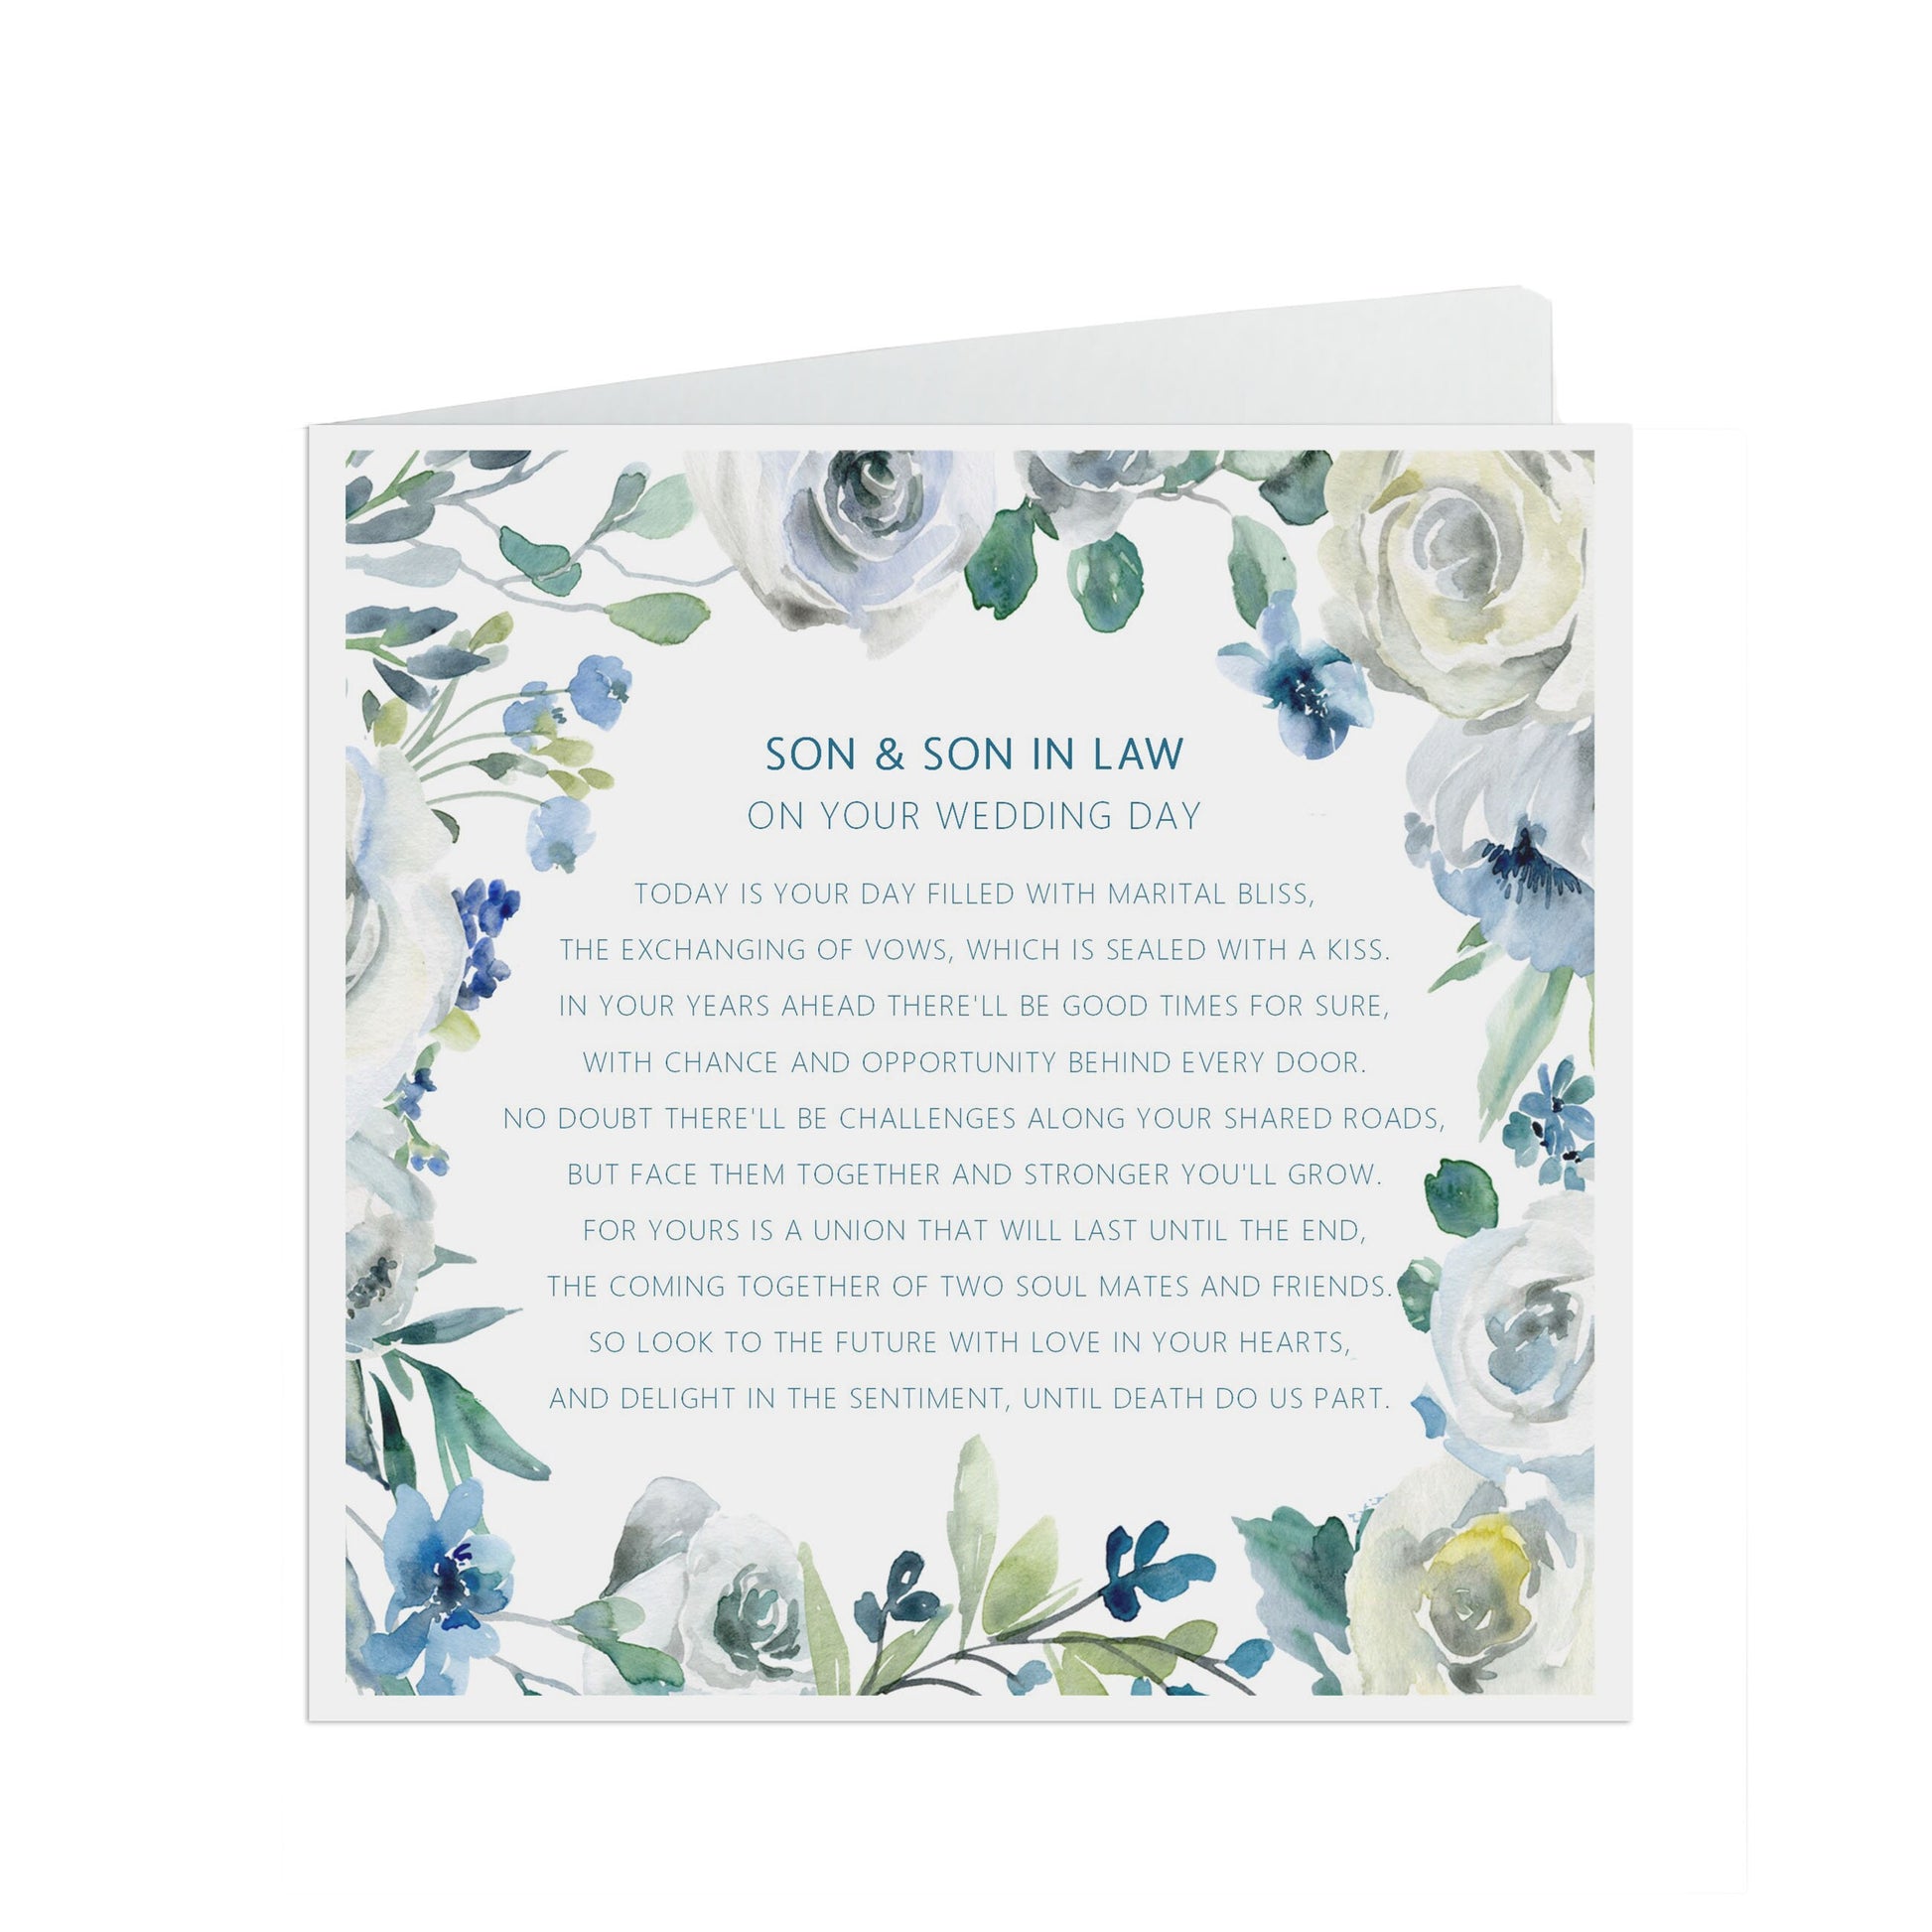 Son & Son In Law On Your Wedding Day Card - Blue Floral